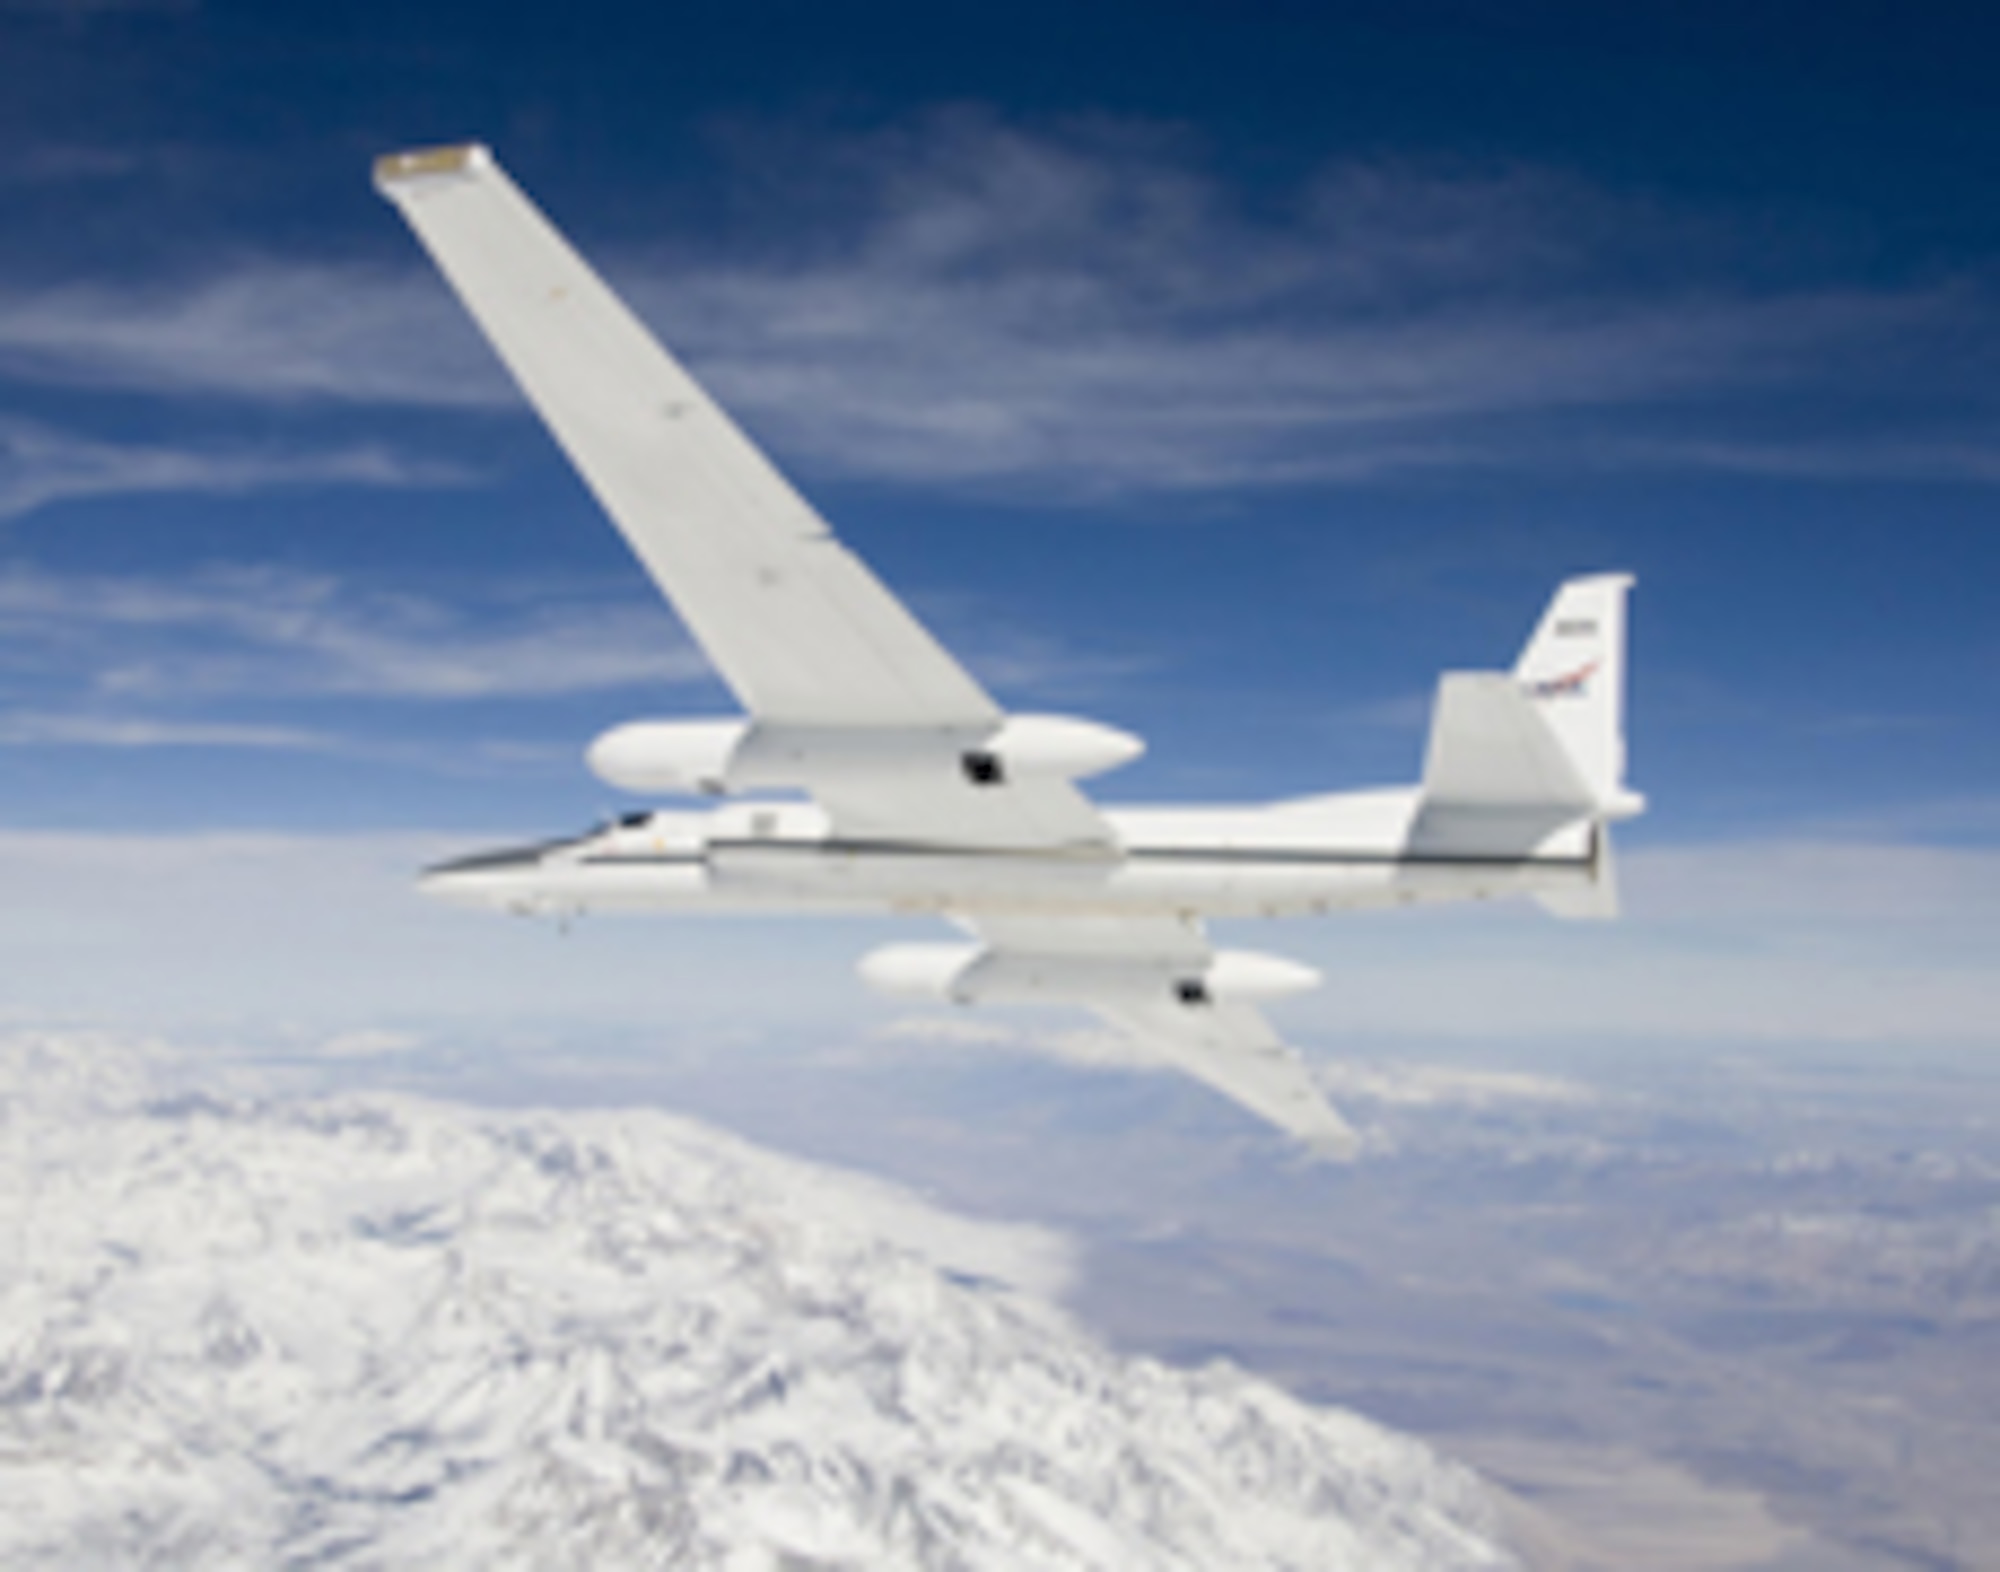 One of NASA's ER-2 aircraft, pictured here, collects data in support of NASA's Sub-orbital Science Program. The ER-2s have supported airborne research in the United States and around the globe. The information collected by the ER-2 has been used by numerous organizations from NASA and the Environmental Protection Agency to the Army Corps of Engineers. Photo courtesy of NASA